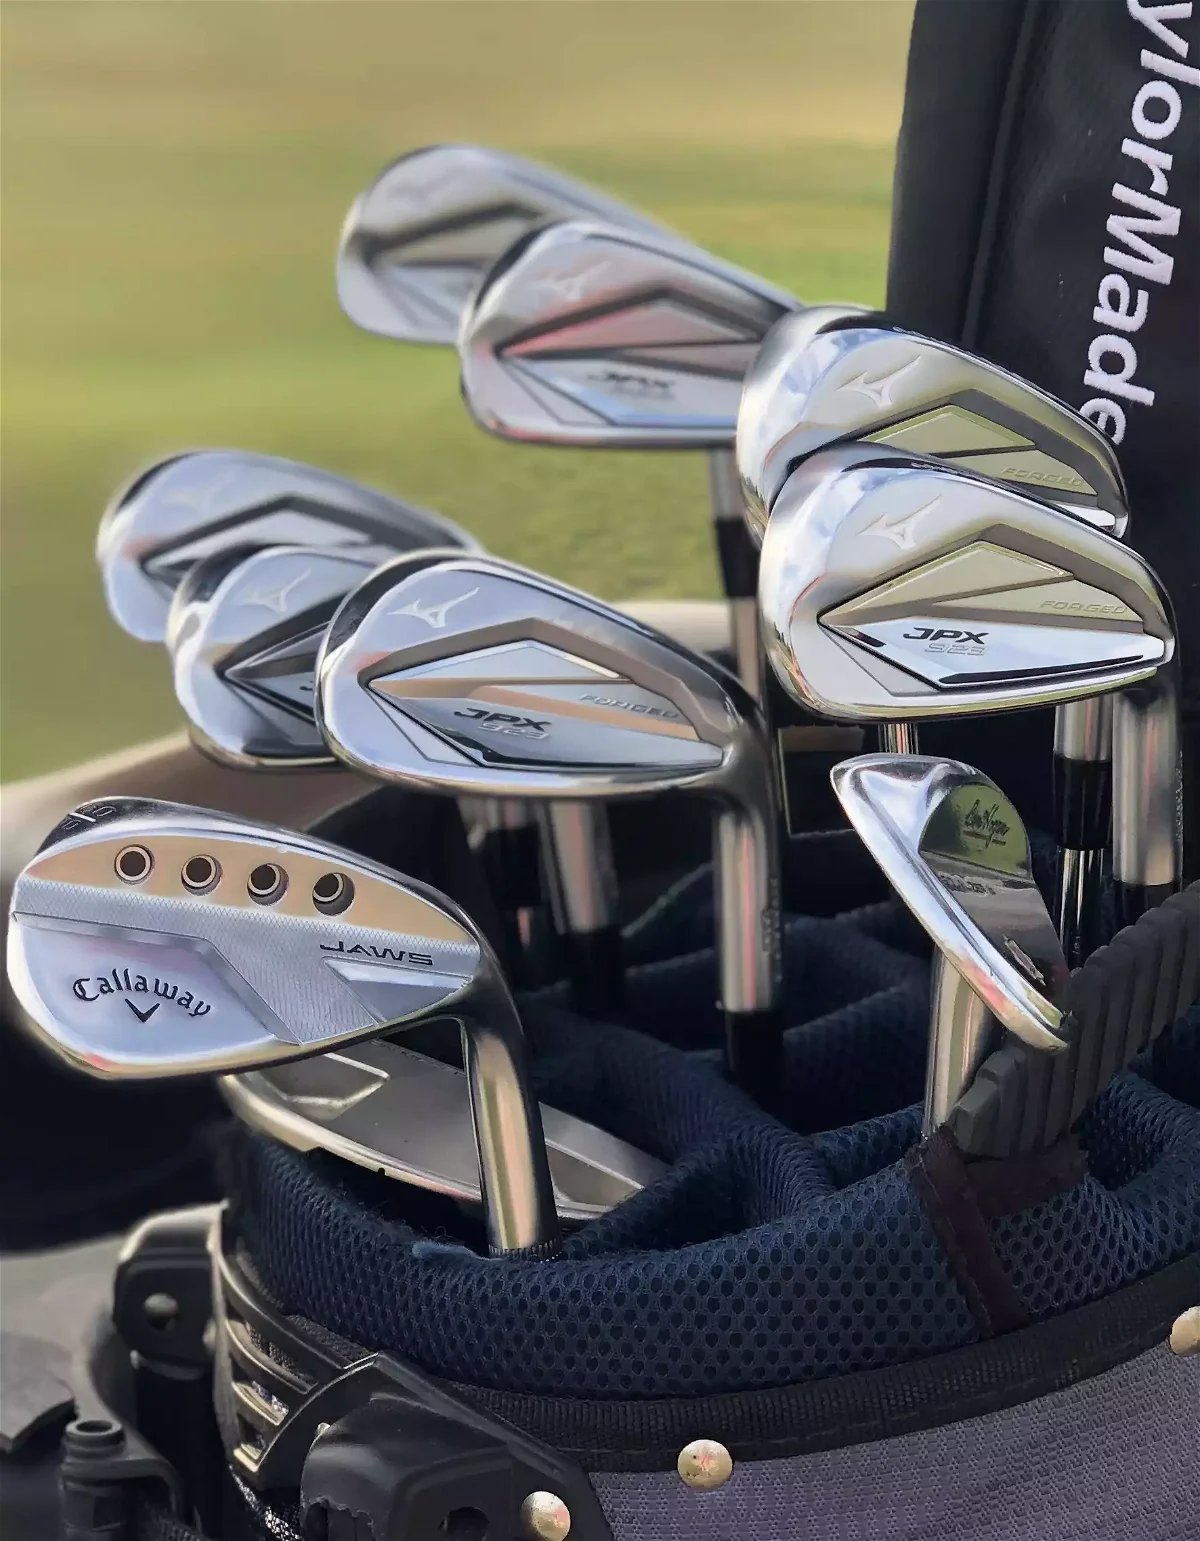 What Are The Best Golf Irons For Low Handicappers?